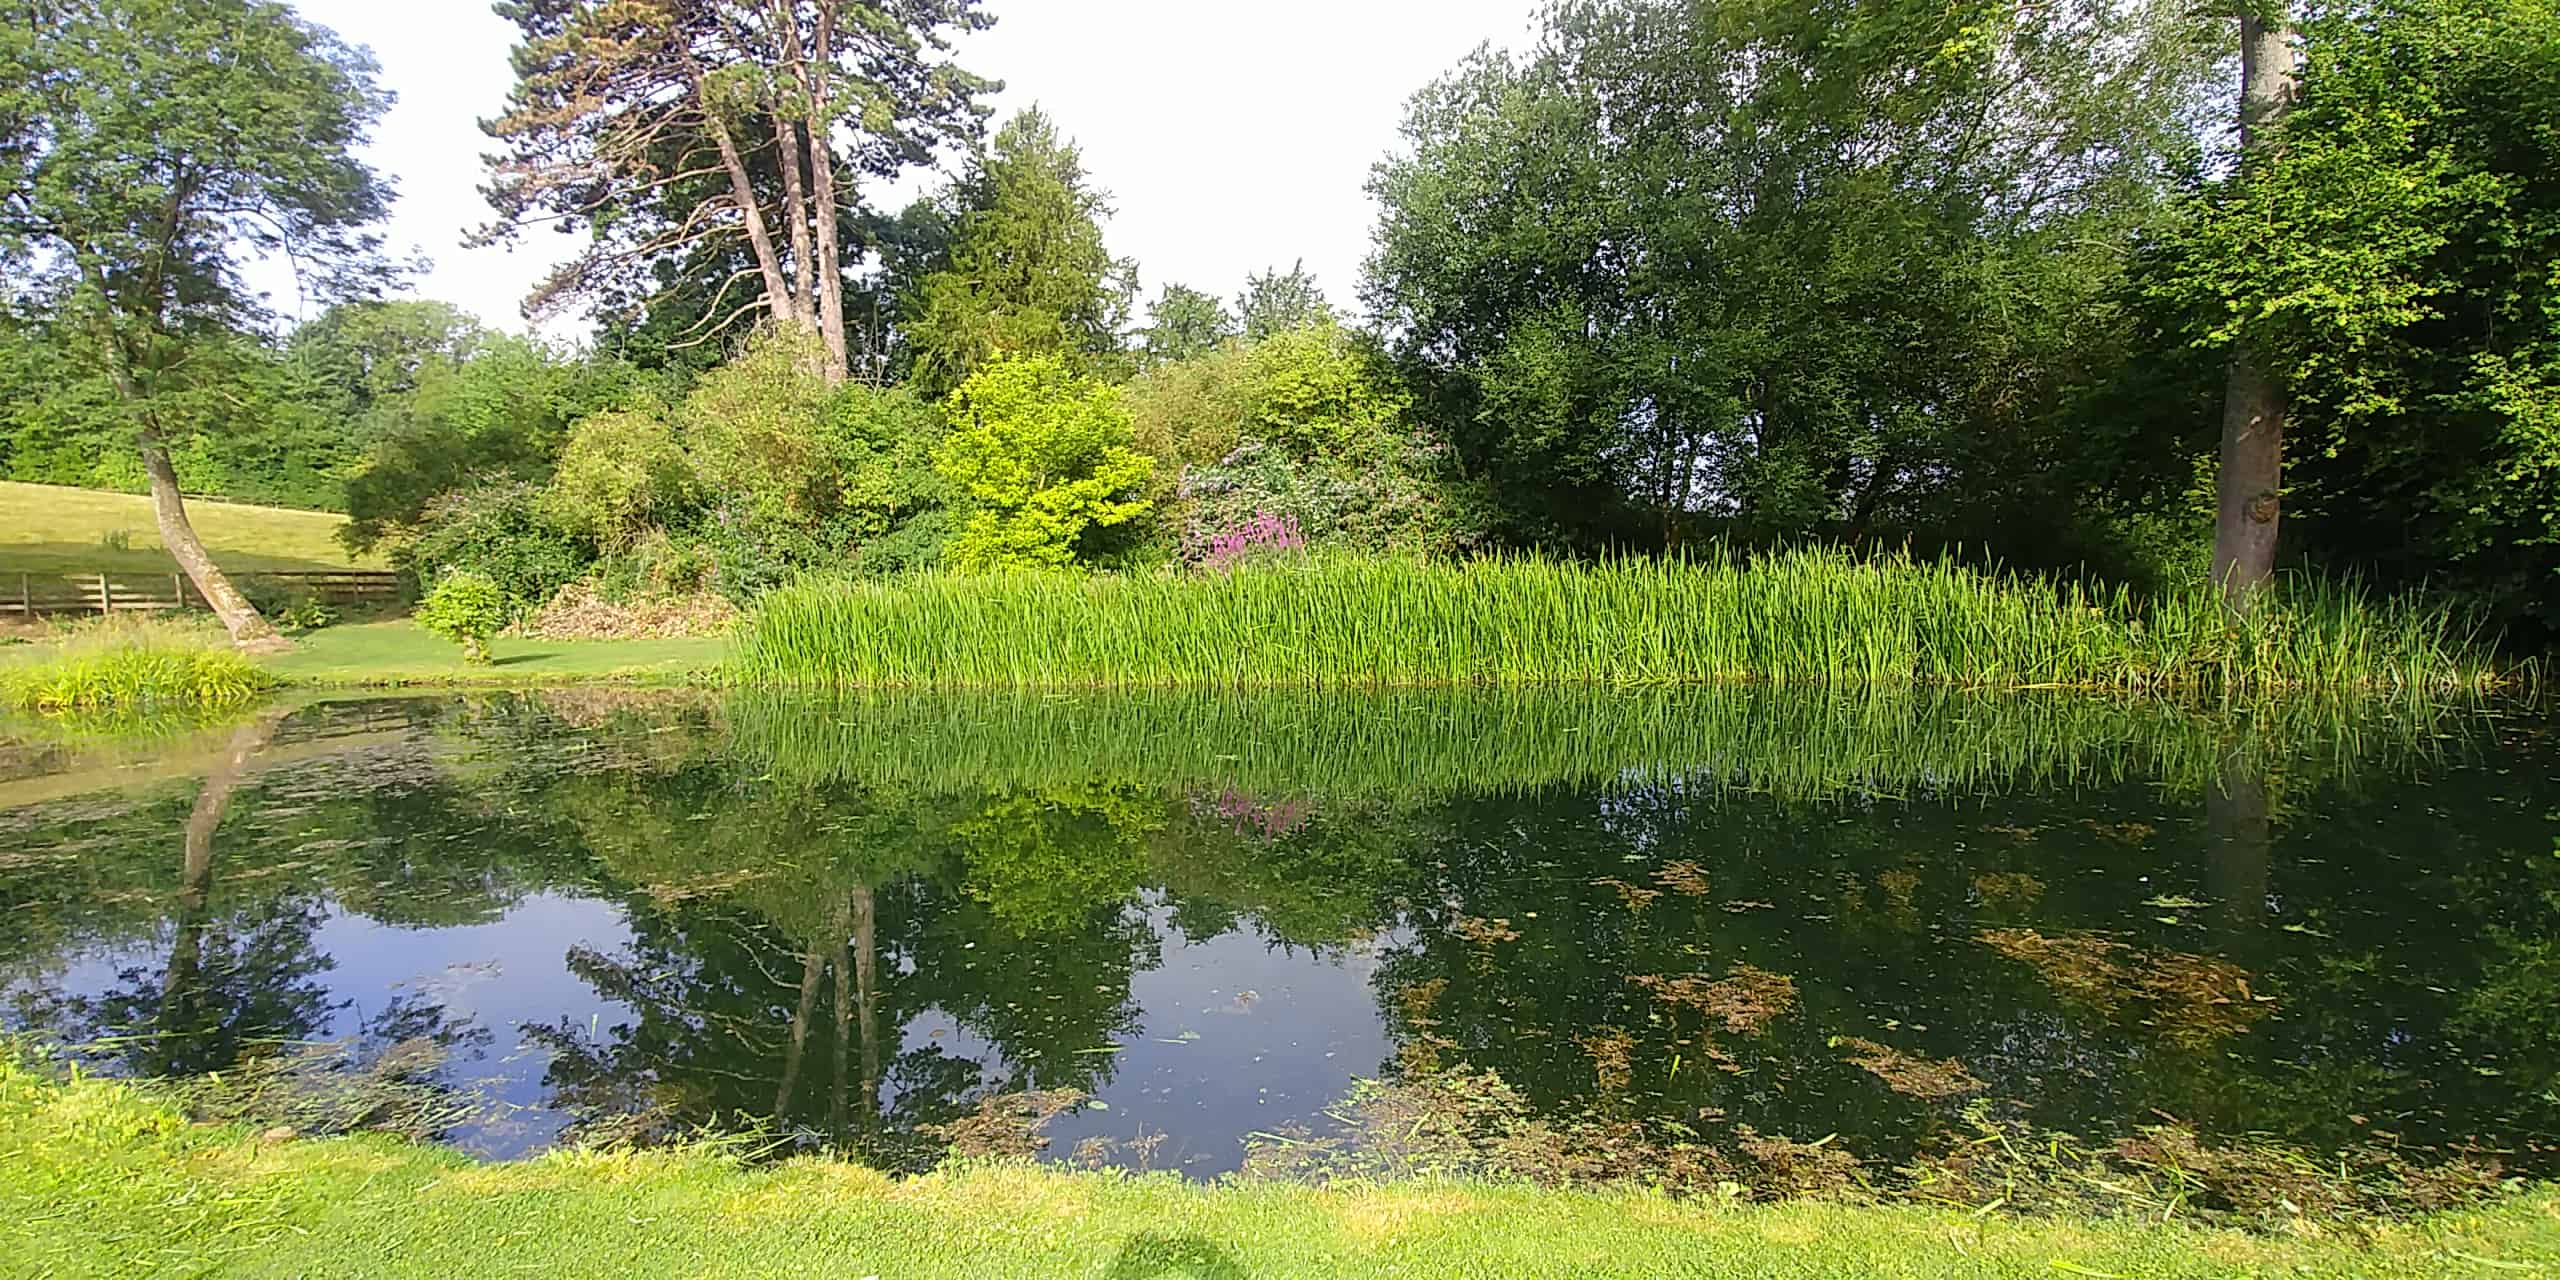 The pond and gardens at Wythall Estate, Ross-on-Wye England